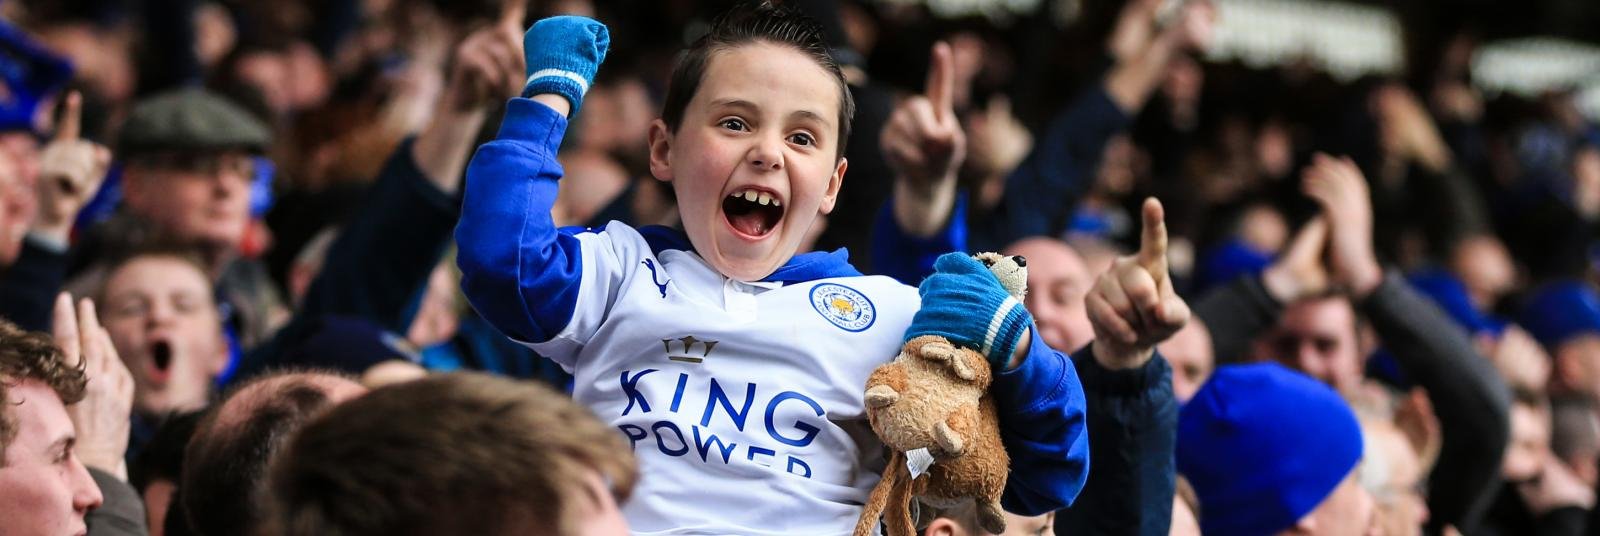 Premier League Round-Up: Champions Leicester City complete fairytale as Tottenham slip-up at Chelsea